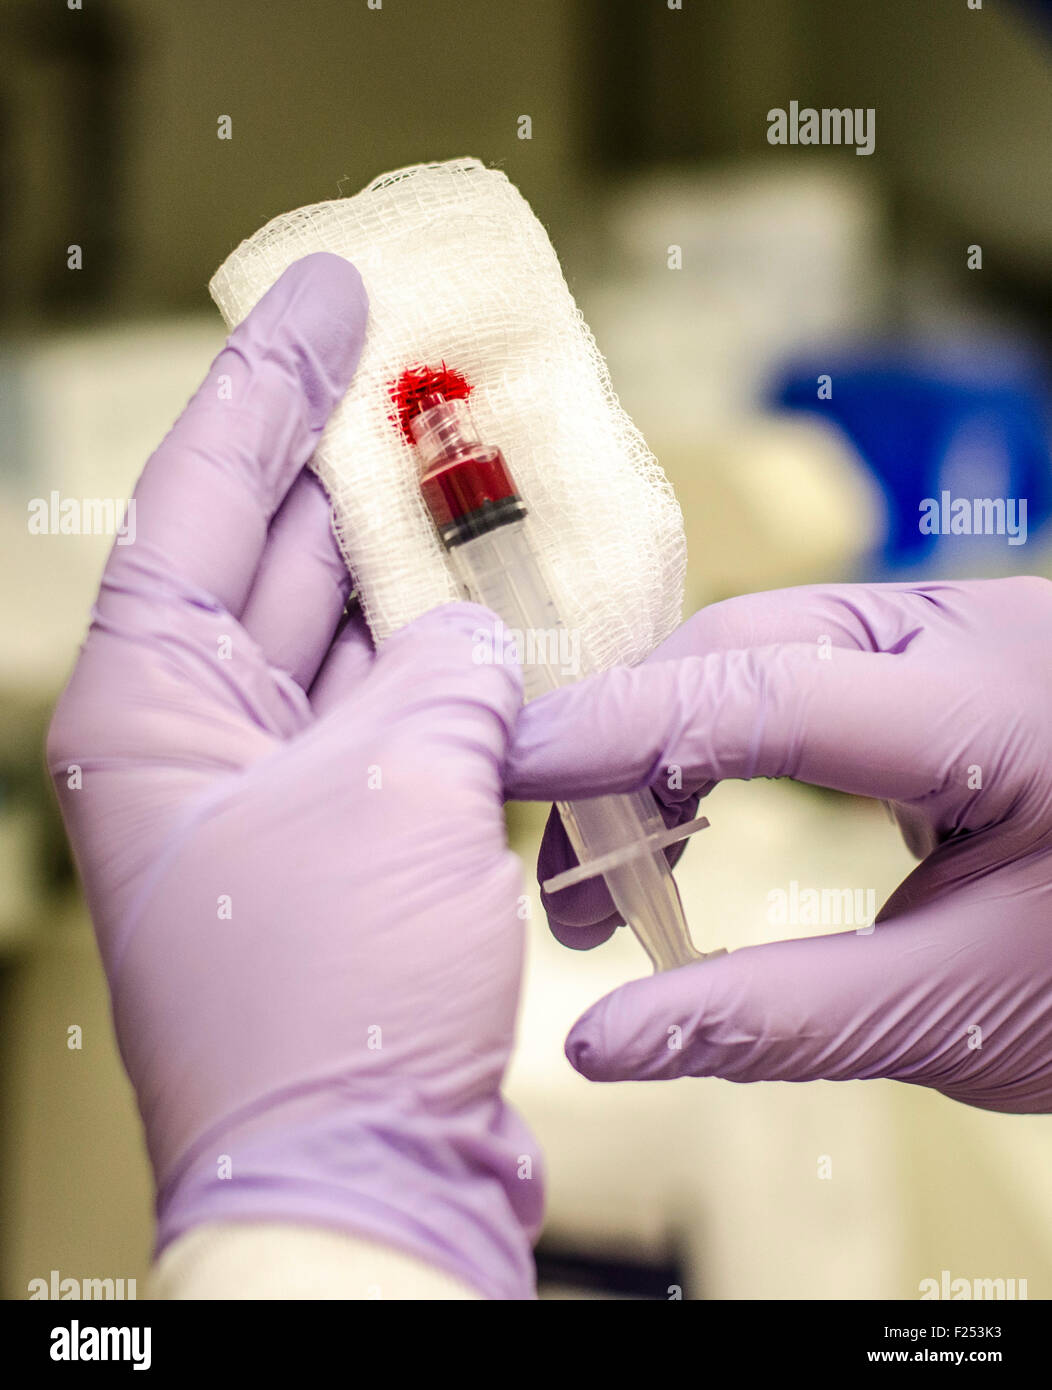 Medical Blood Gas, Checking for clot and removing air bubbles. Stock Photo